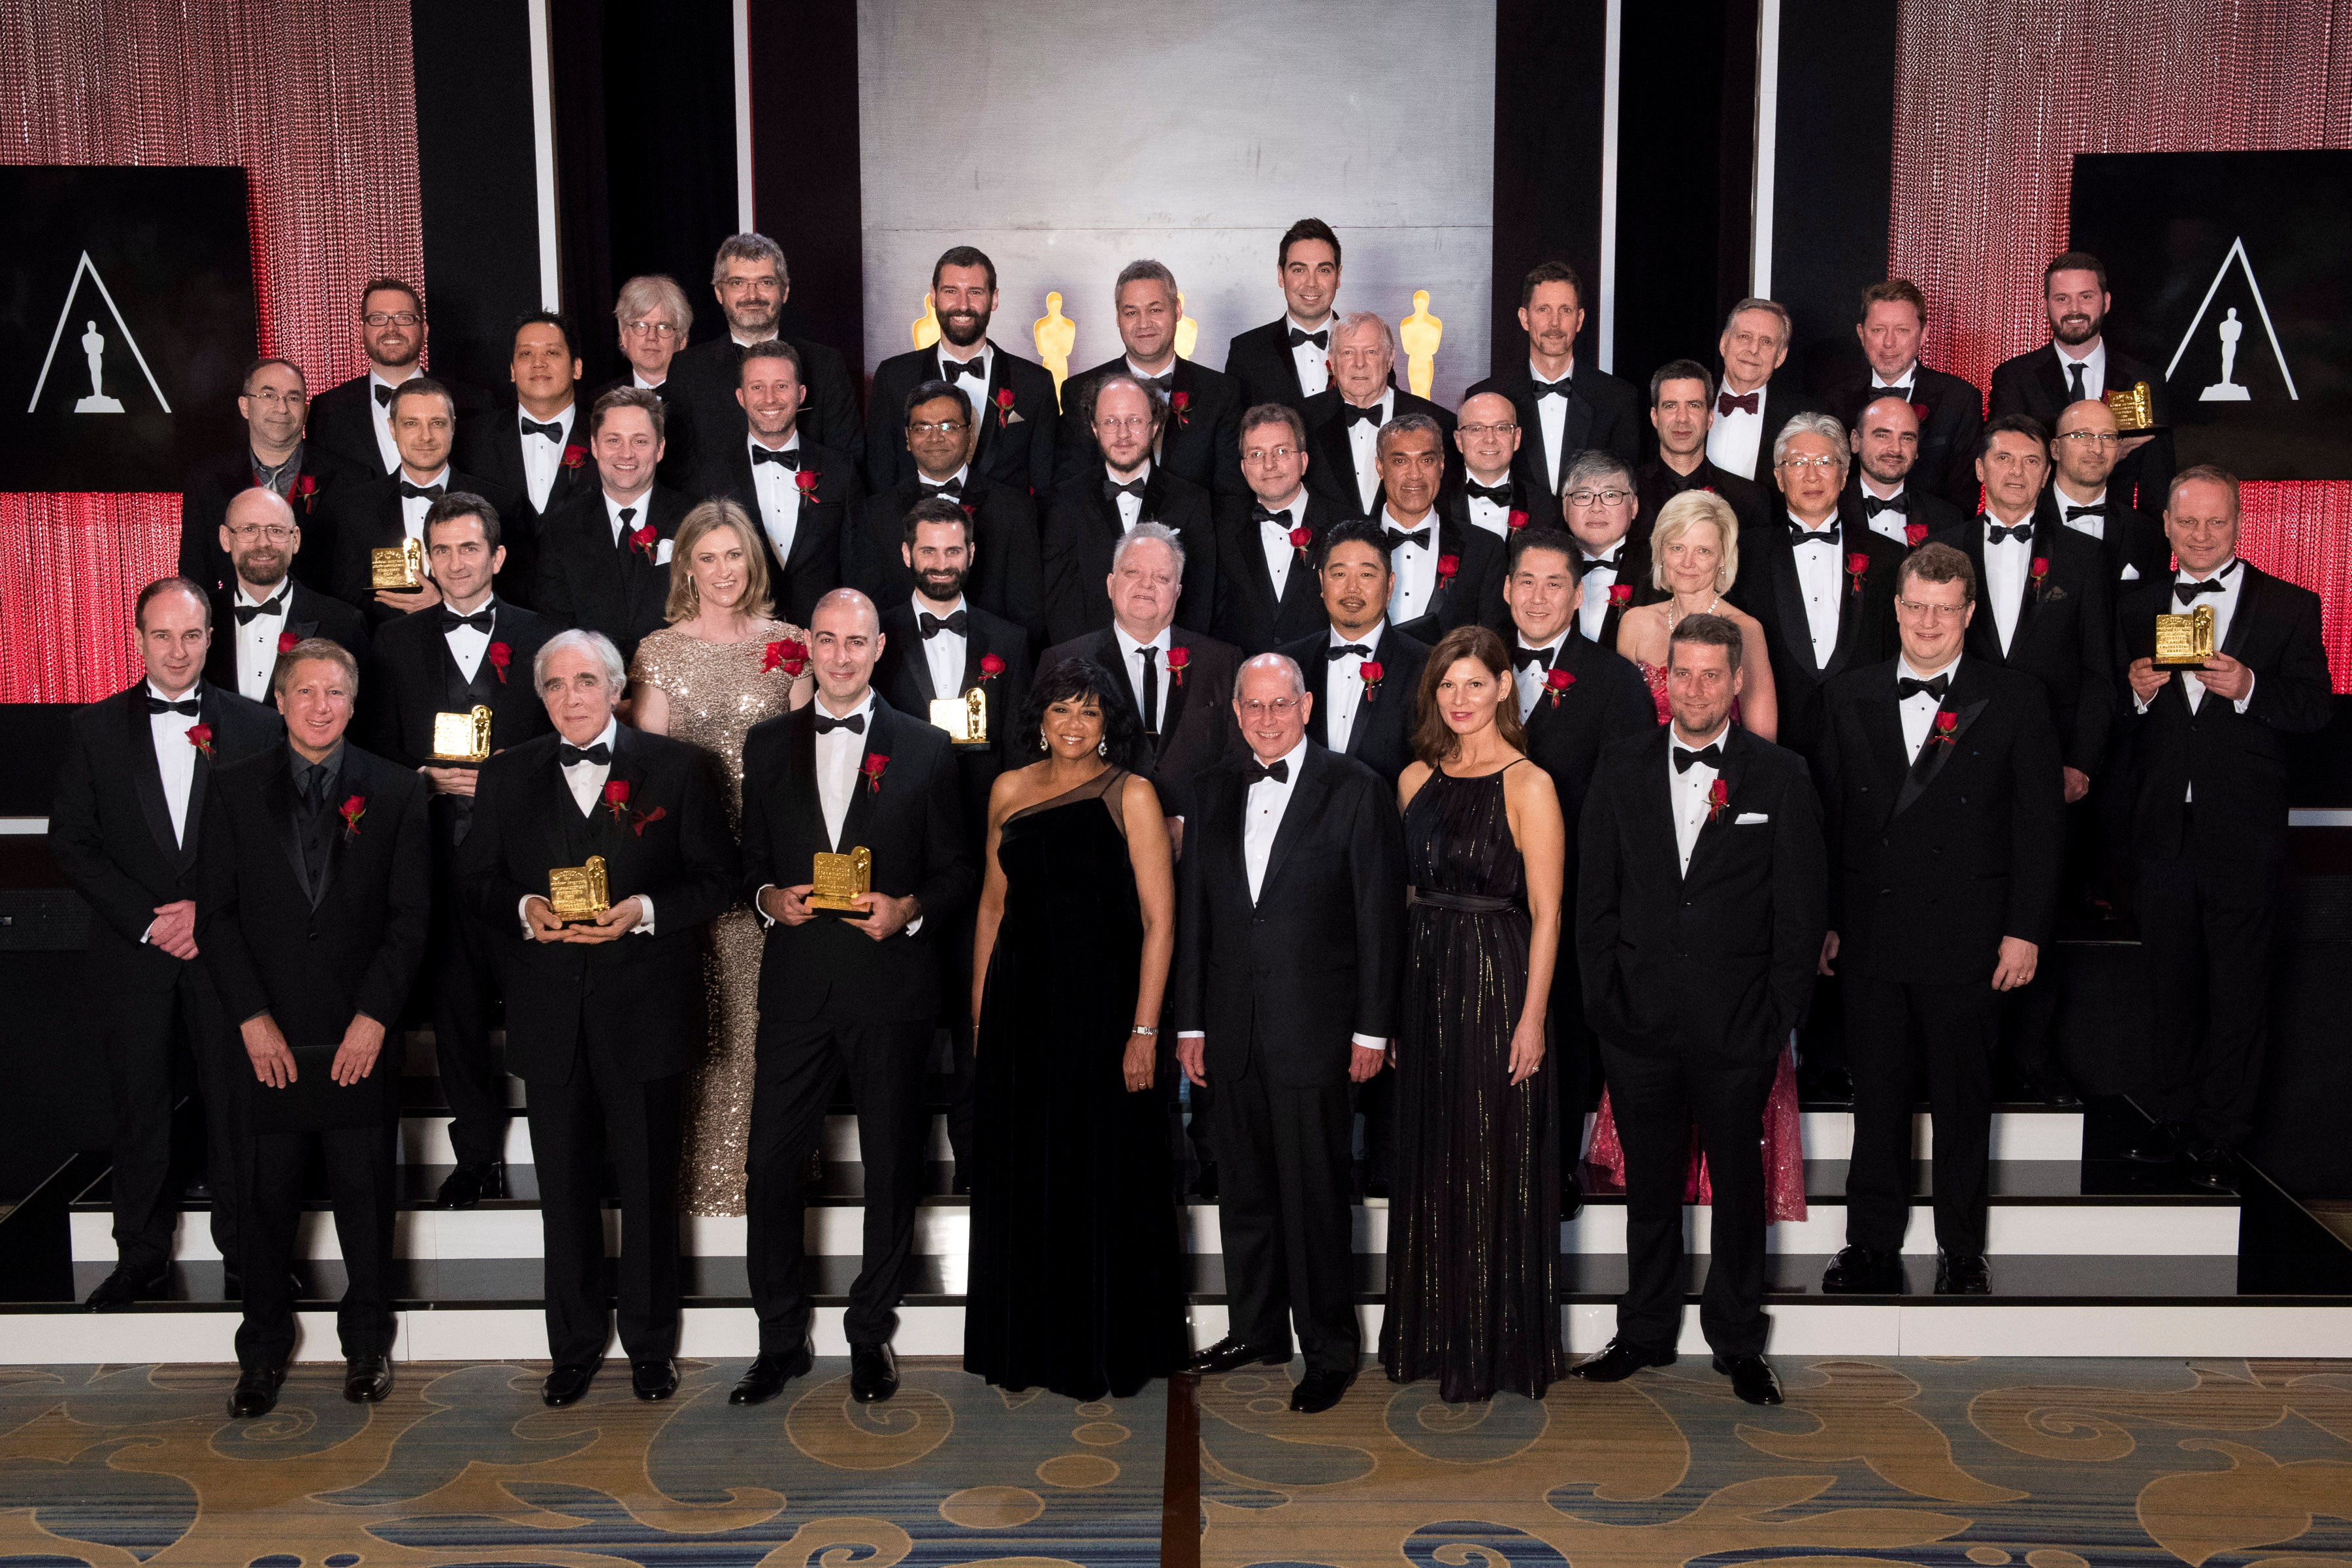 89th Academy Awards, Scientific and Technical Achievement Awards